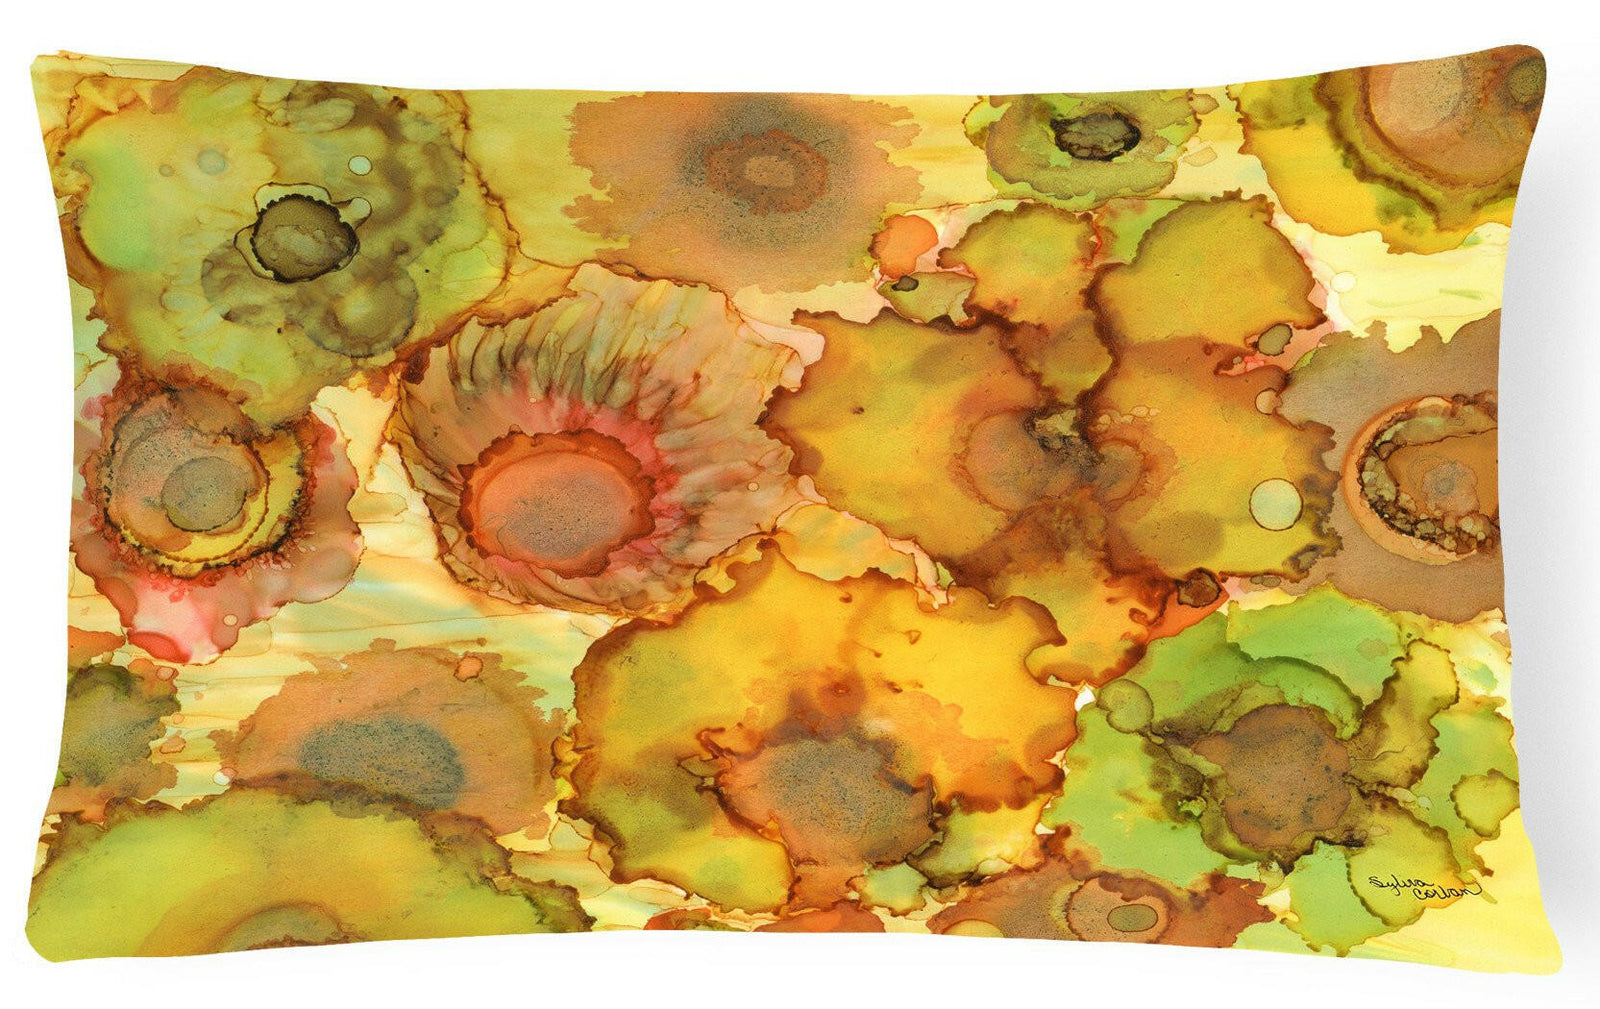 Abstract Flowers in Yellows and Oranges Fabric Decorative Pillow 8986PW1216 by Caroline's Treasures